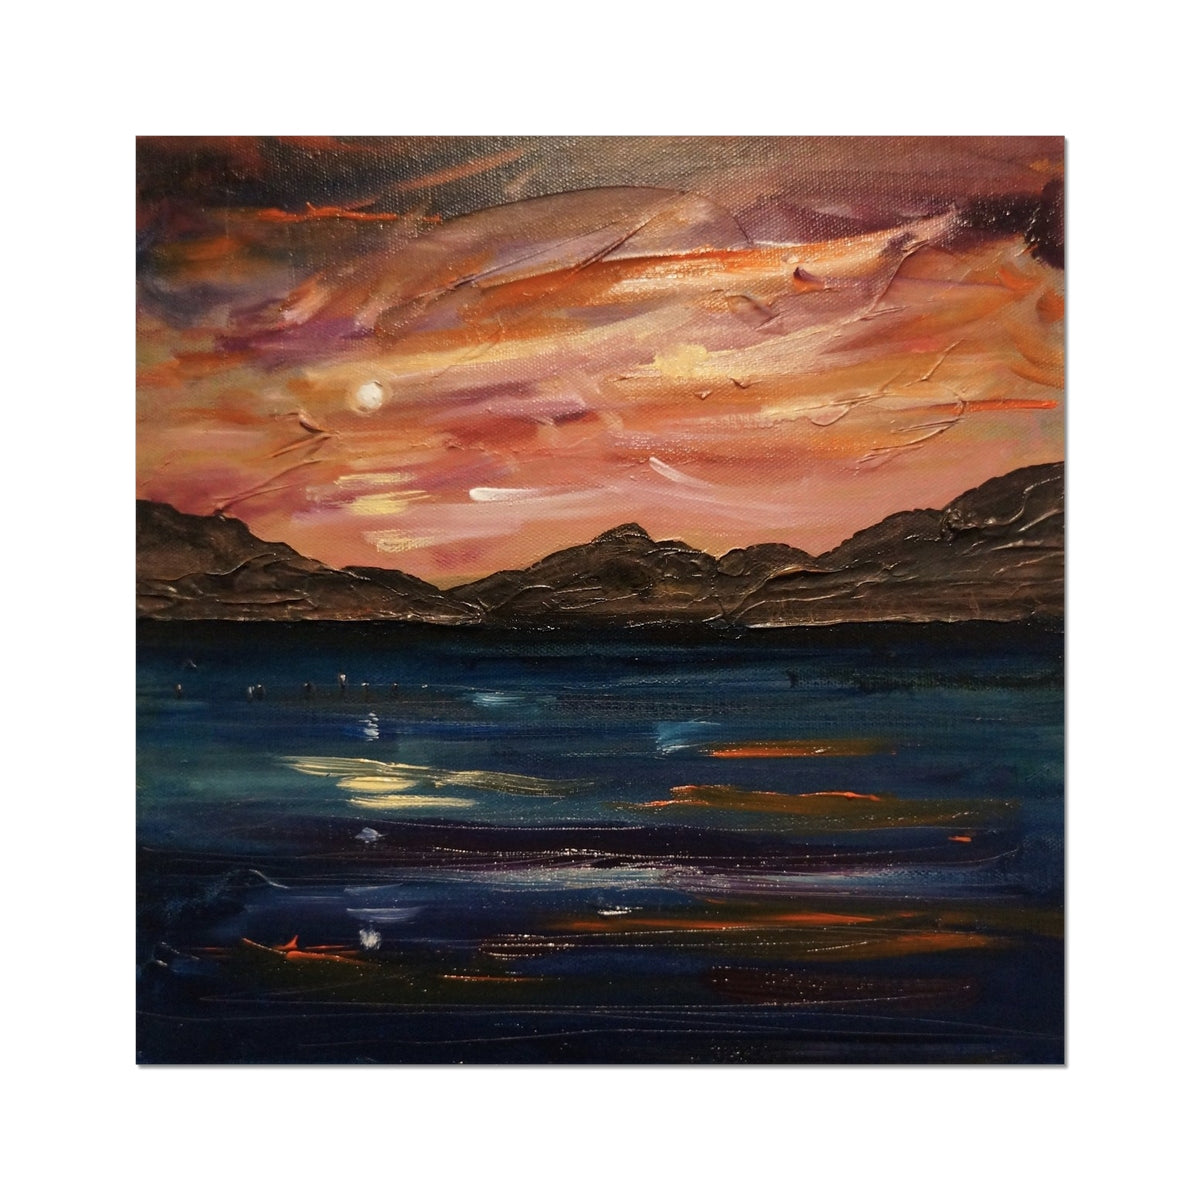 Loch Ness Moonset Painting | Fine Art Prints From Scotland-Unframed Prints-Scottish Lochs & Mountains Art Gallery-24"x24"-Paintings, Prints, Homeware, Art Gifts From Scotland By Scottish Artist Kevin Hunter